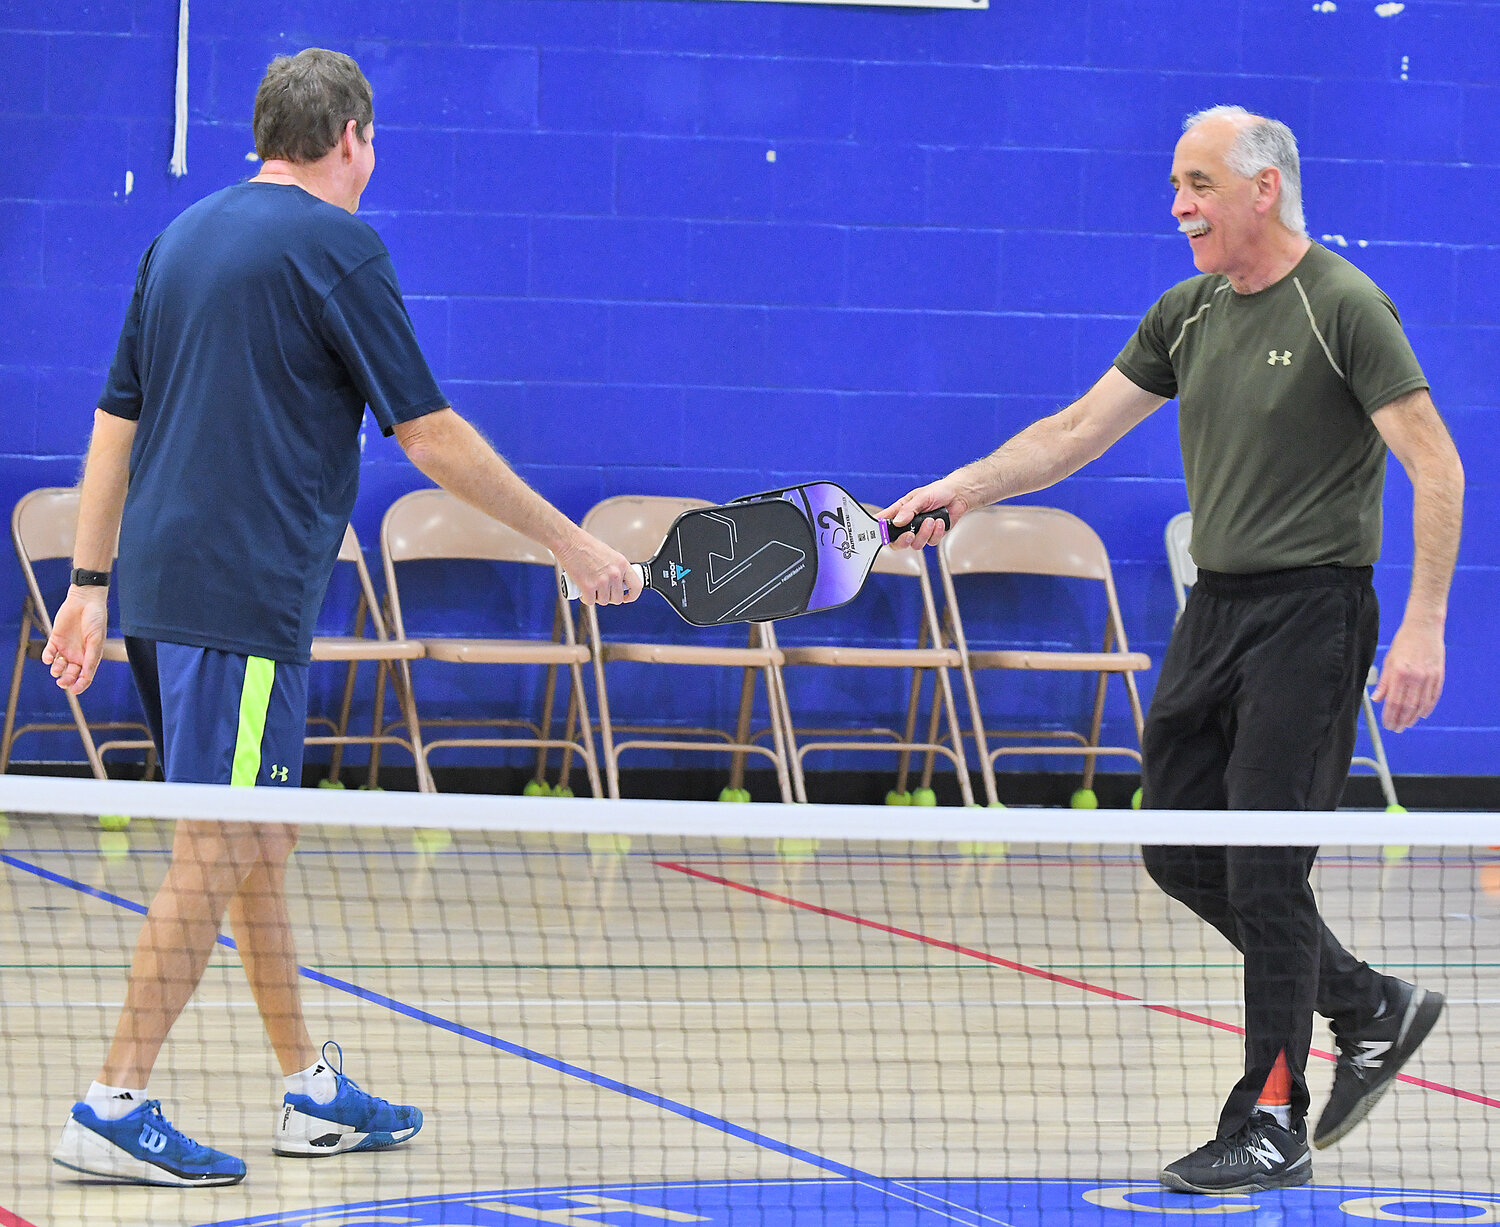 Pickle ball partners Jamie King and David Meislin clink paddles after scoring a point Thursday evening at the Jewish Community Center.